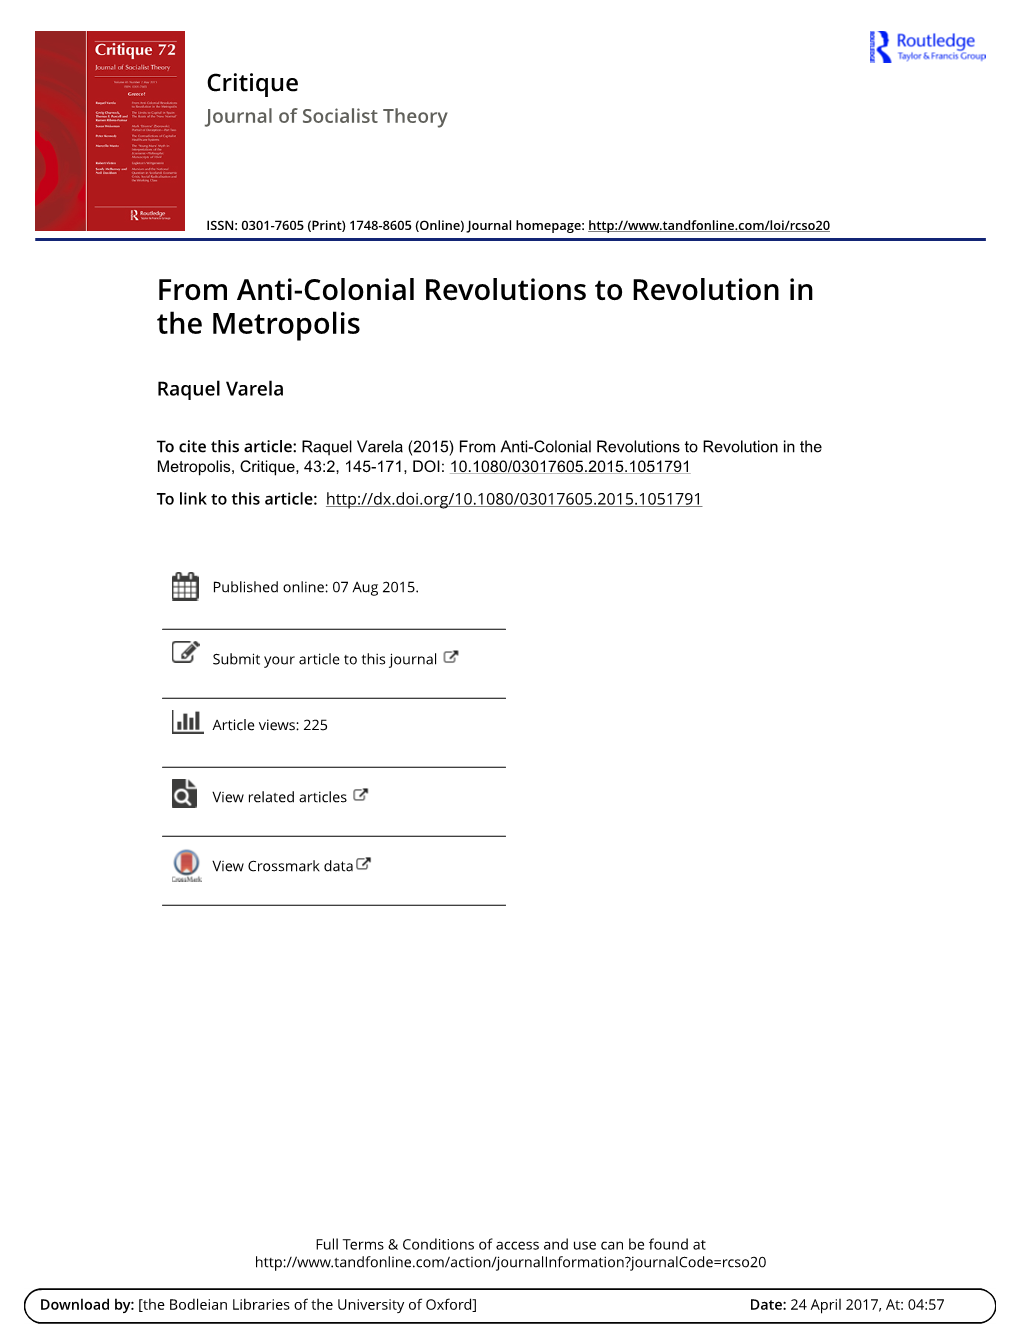 From Anti-Colonial Revolutions to Revolution in the Metropolis